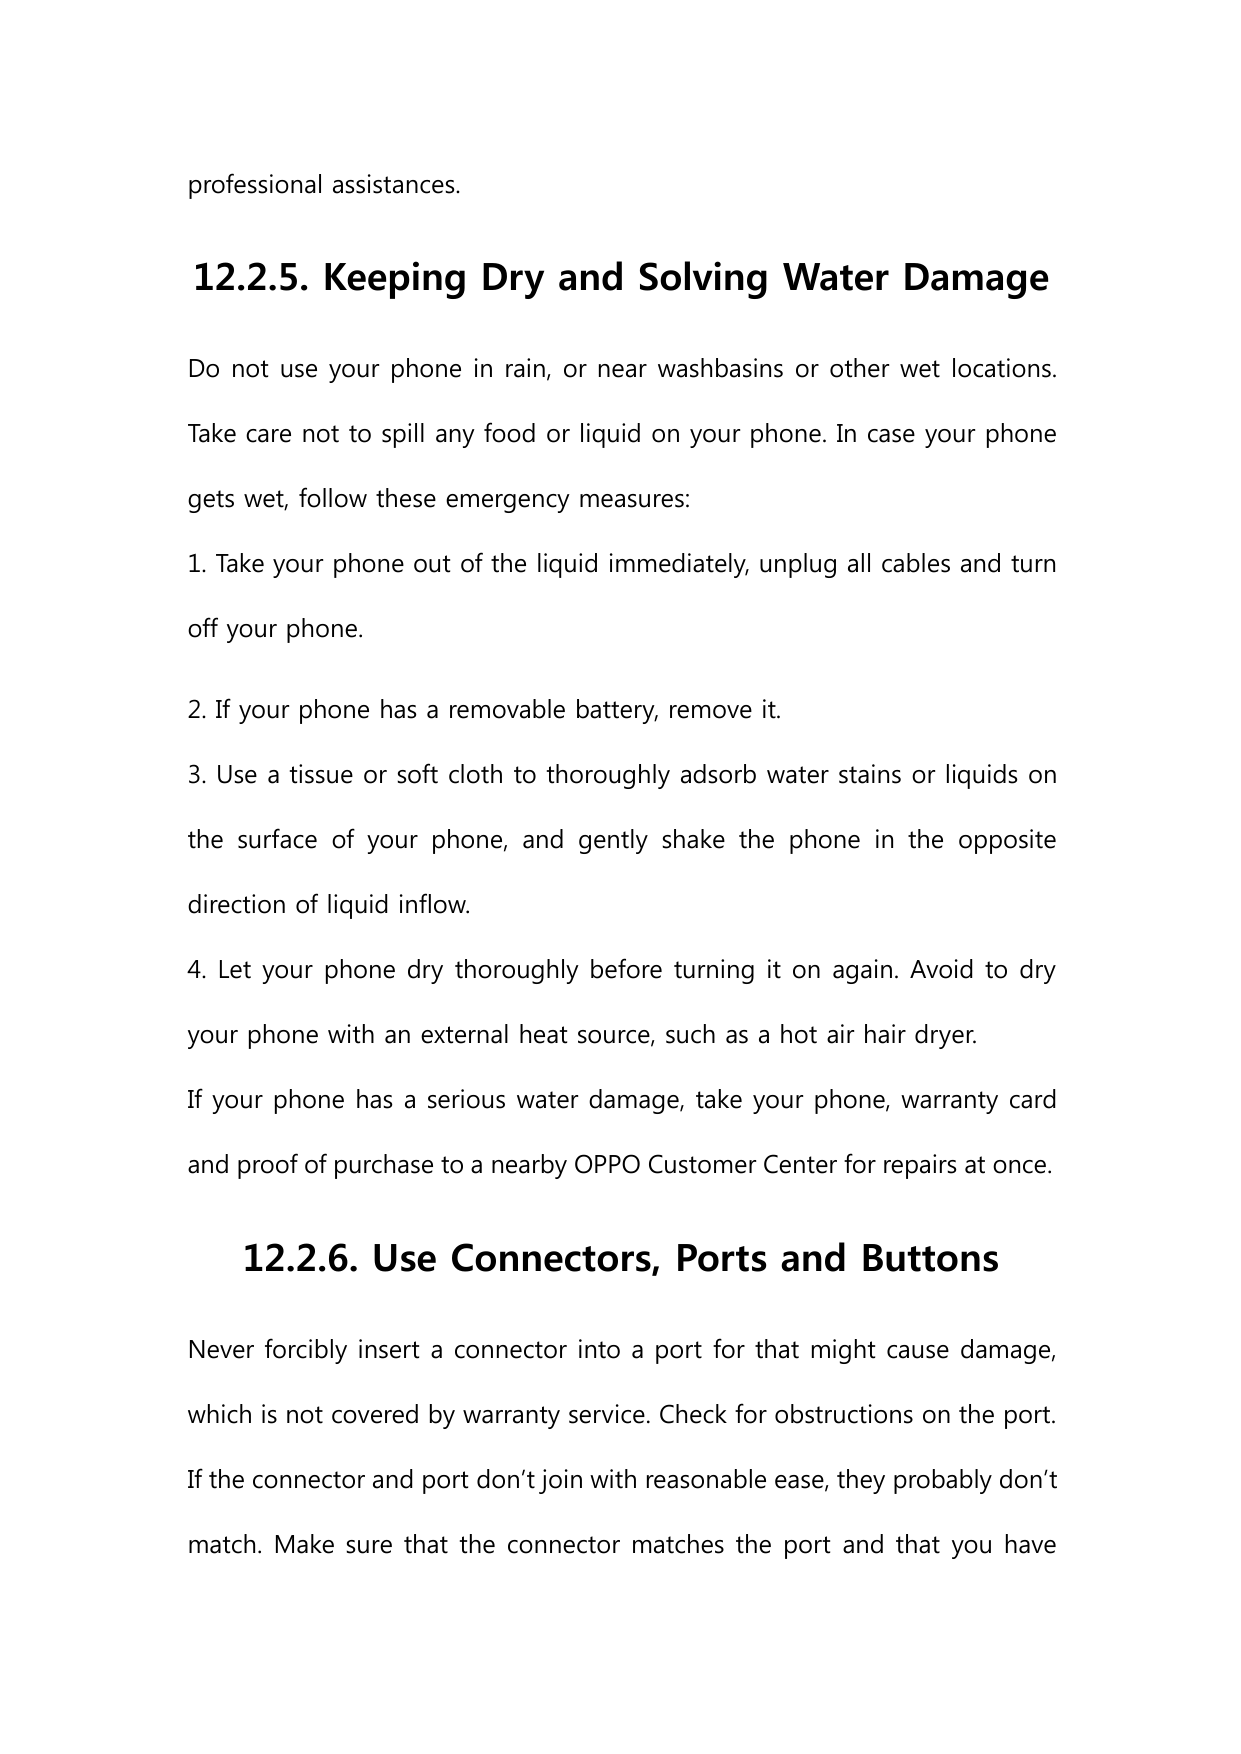 professional assistances.12.2.5. Keeping Dry and Solving Water DamageDo not use your phone in rain, or near washbasins or other 